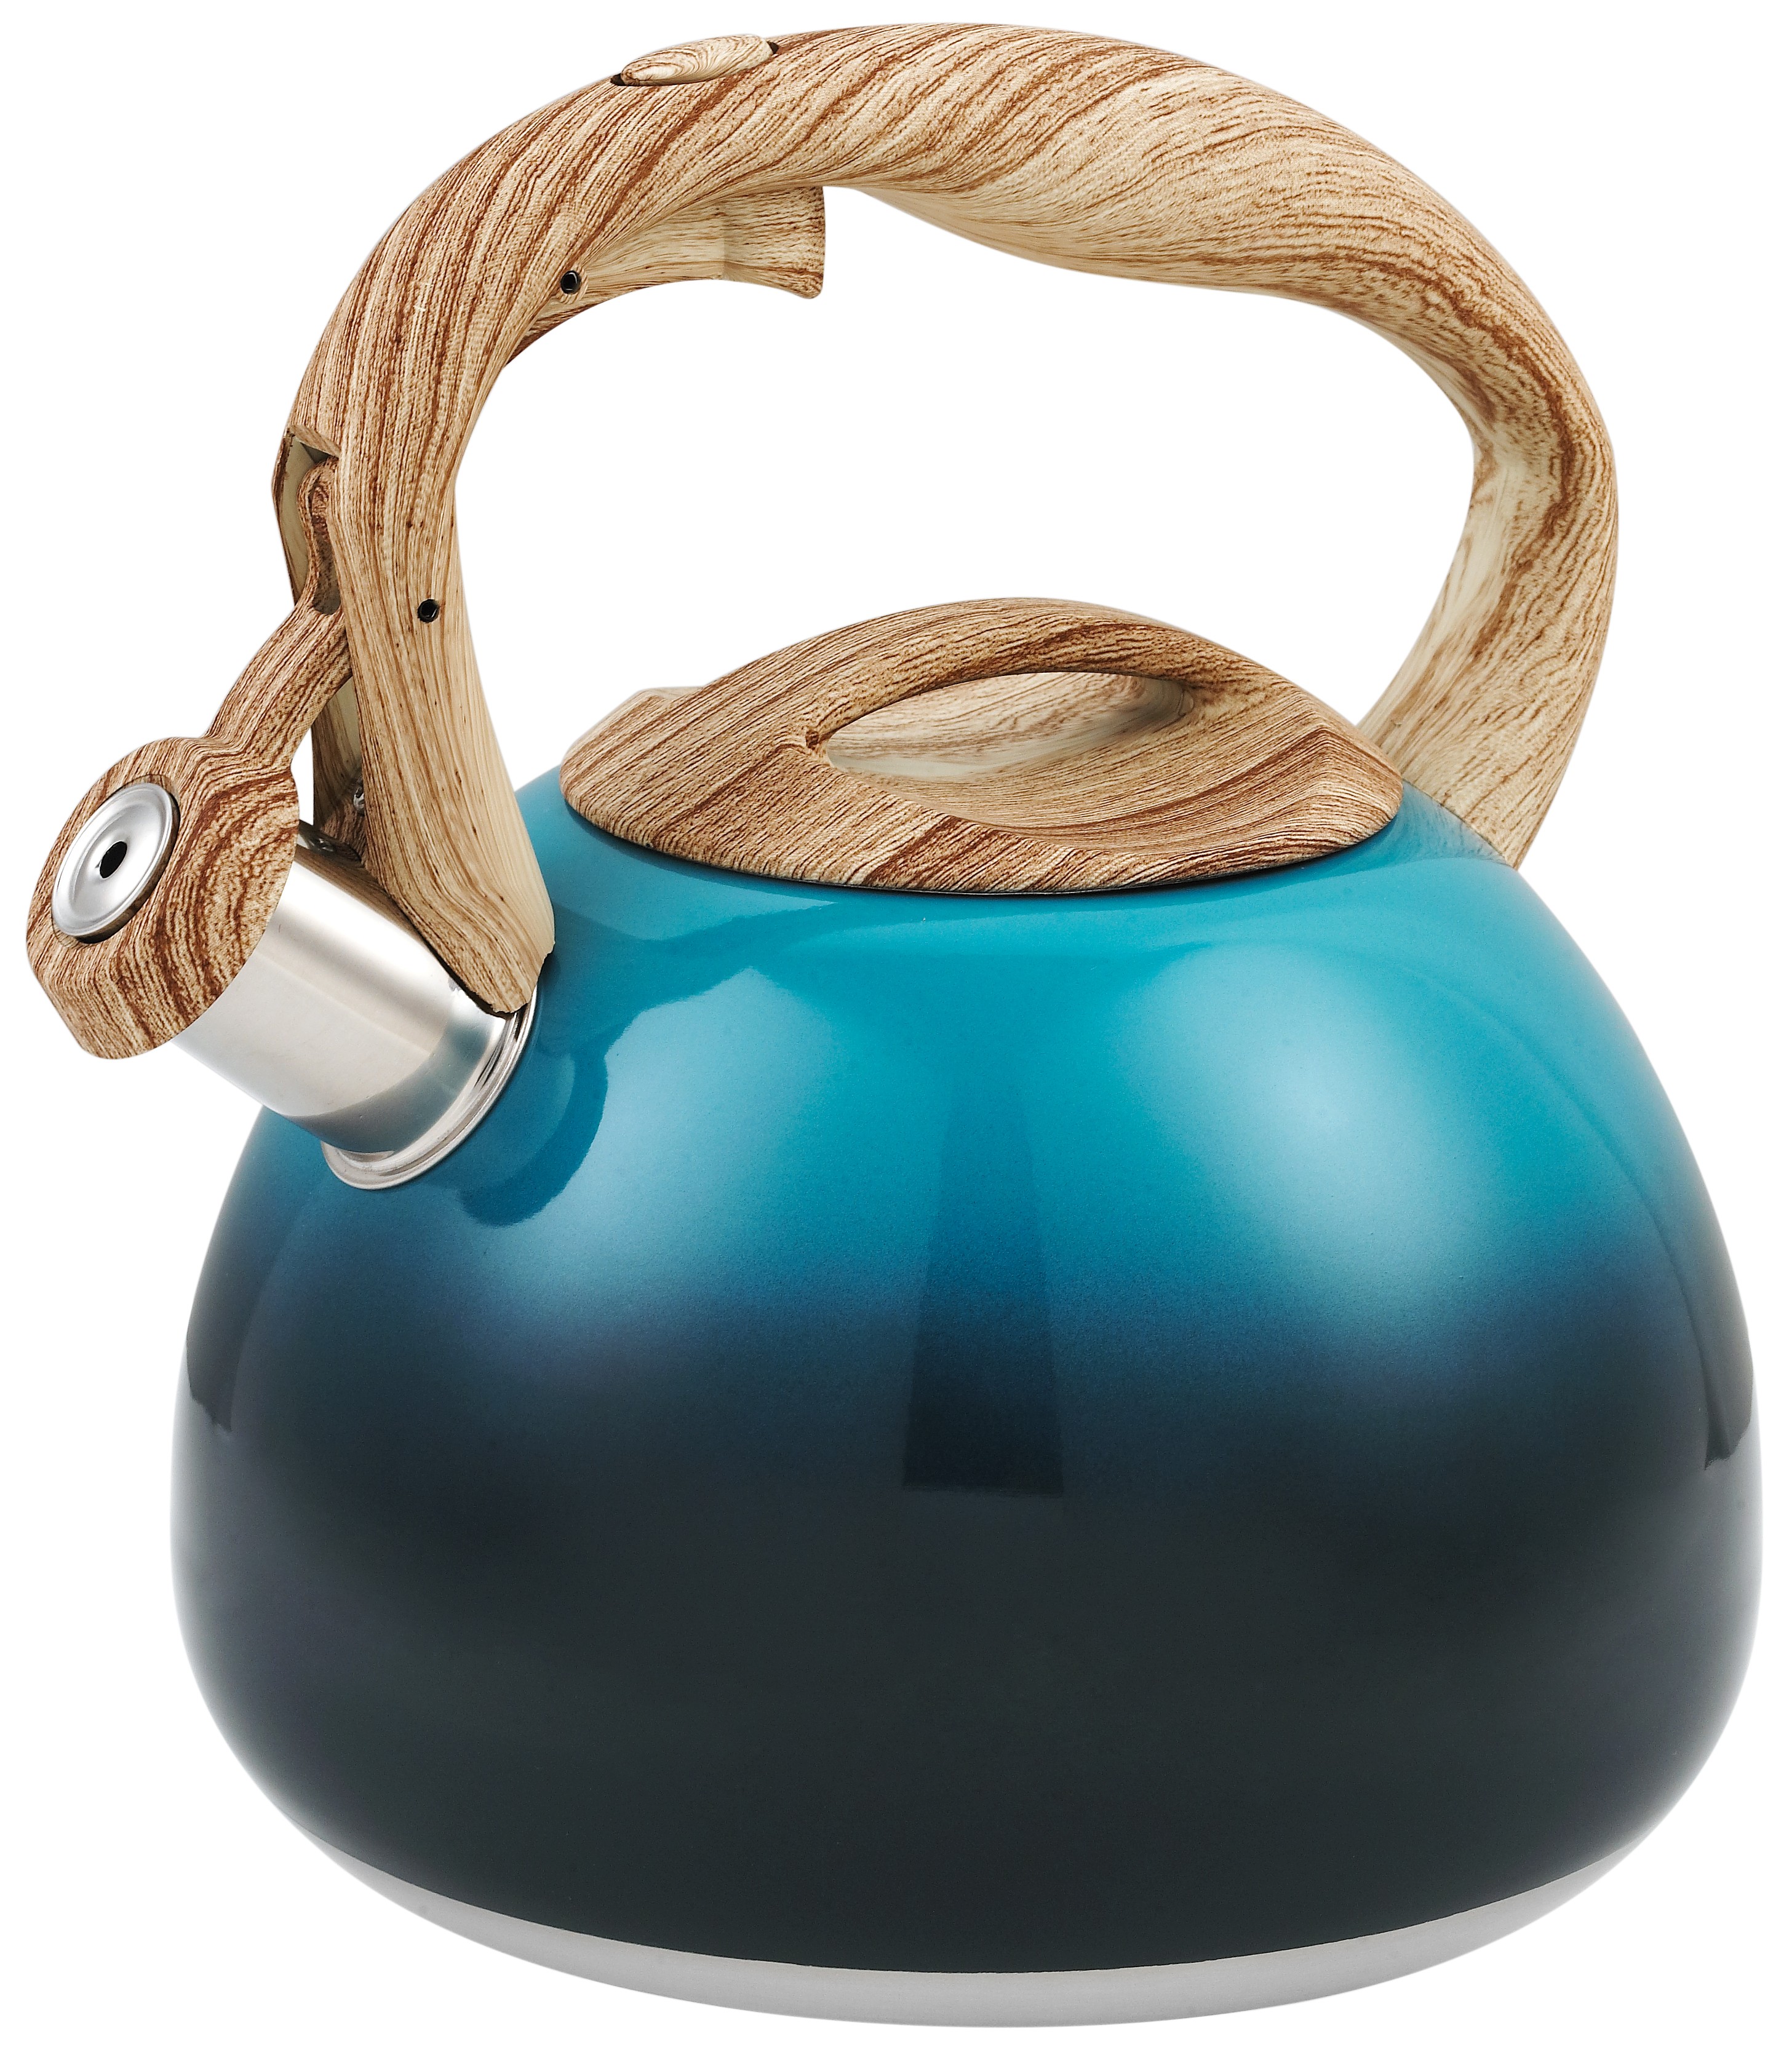 Gradient Color Whistling Kettle with 2.8l Stove Top And Capsule Bottom Whistling Kettle with Wooden Handle